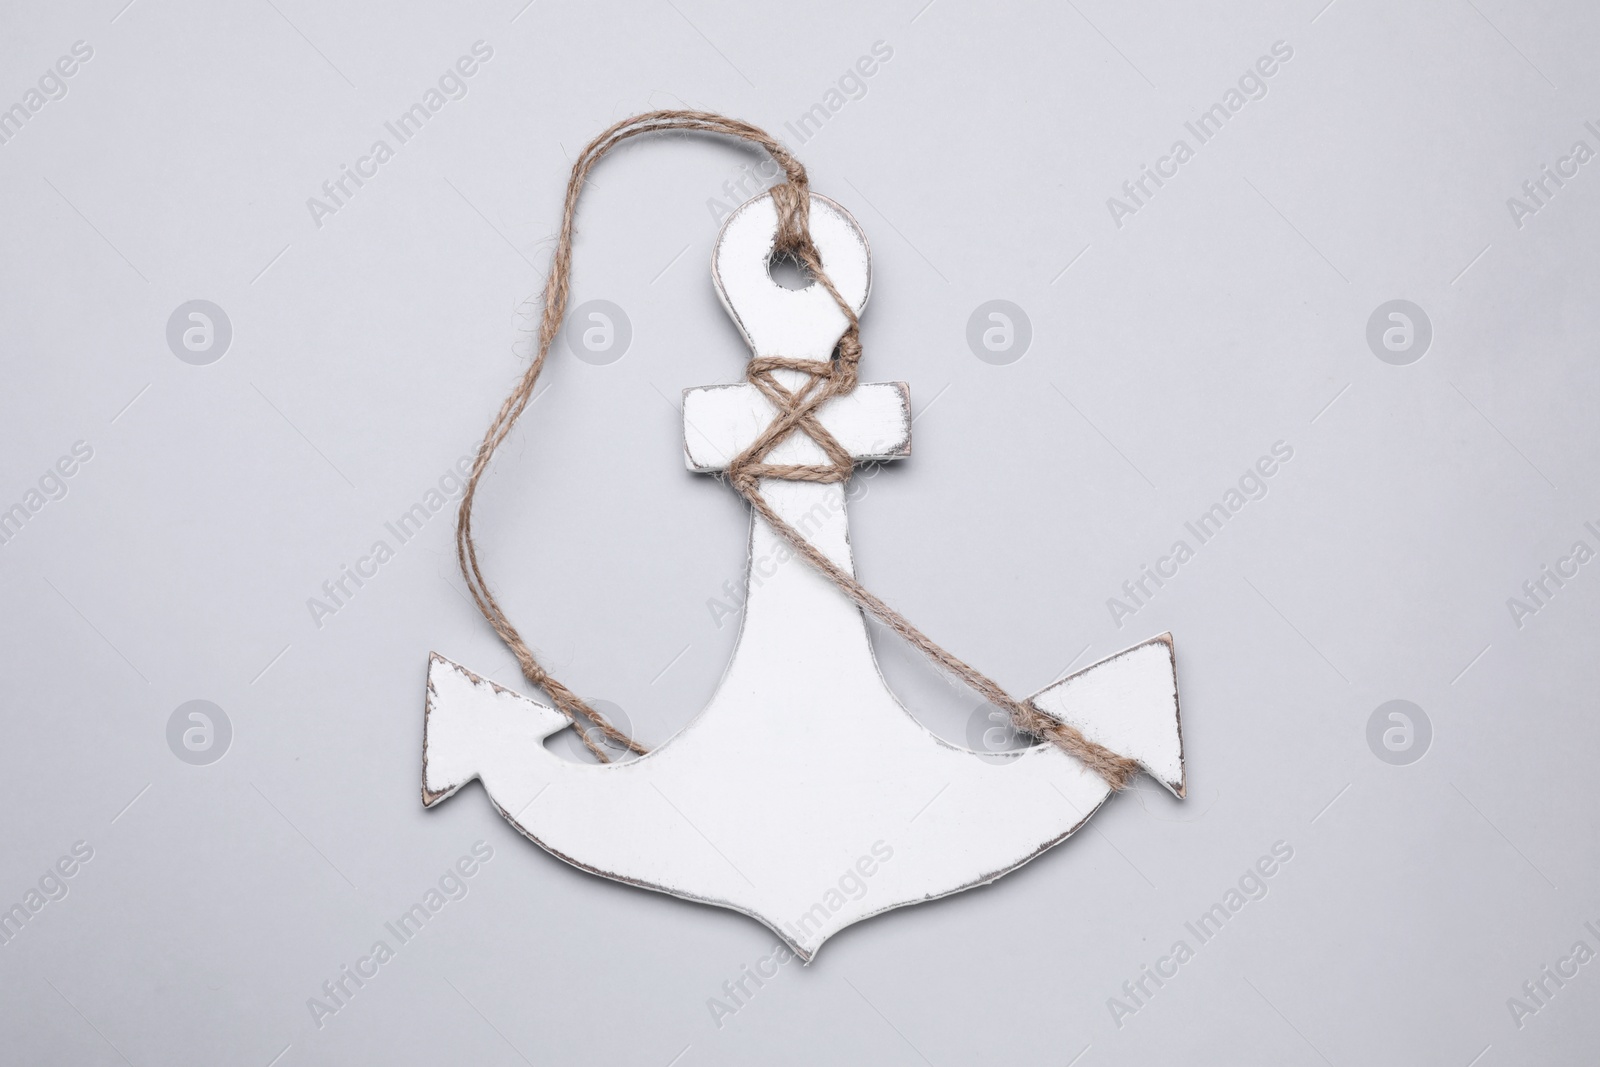 Photo of White wooden anchor figure on light background, top view